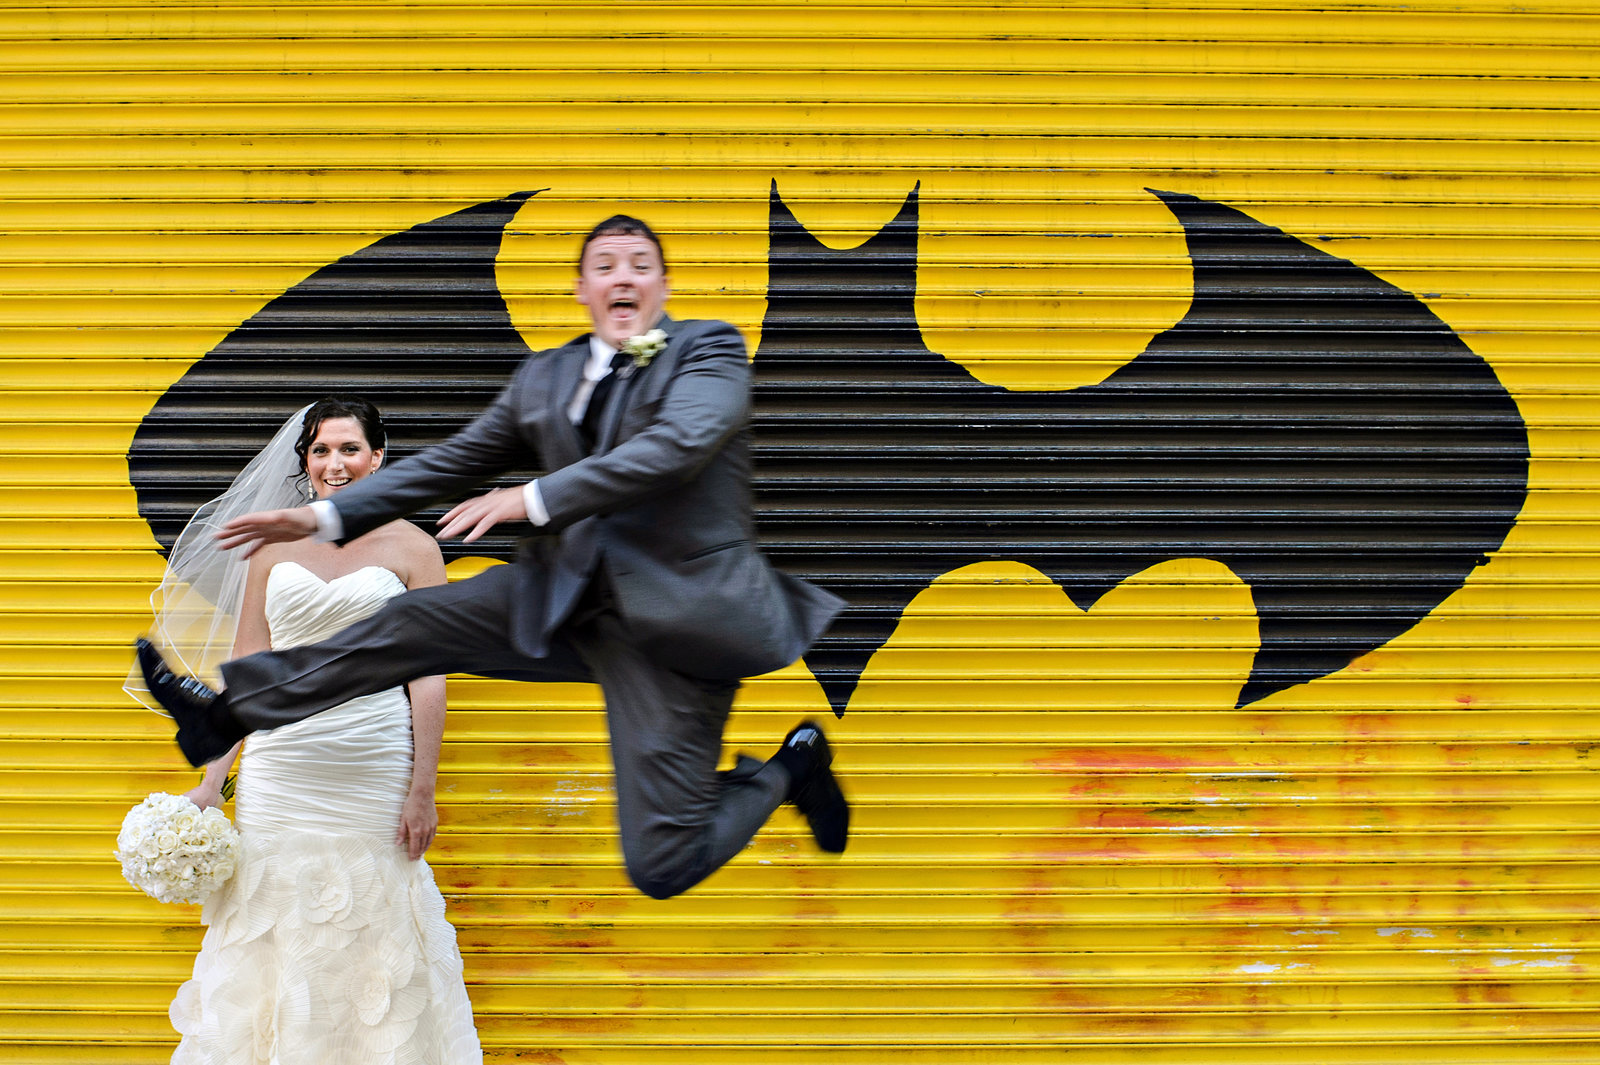 A wedding couple jump for love in front of batman graffiti on South Street in Philadelphia.